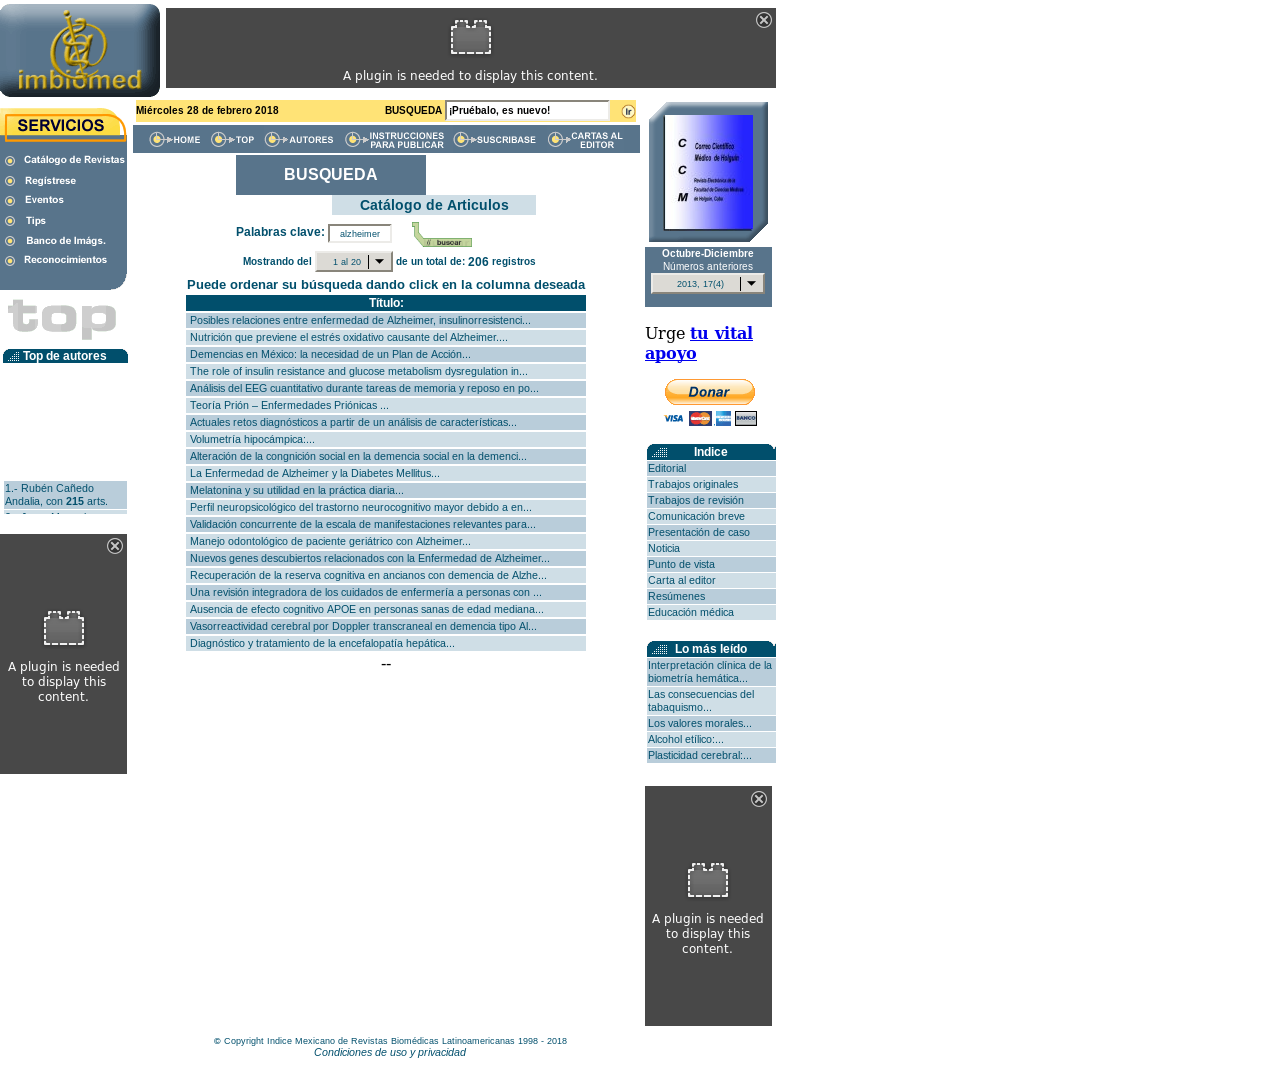 Cache grafica http://www.imbiomed.com.mx/1/1/articulos.php?method=searchKeyword&keywords=alzheimer&x=0&y=0  